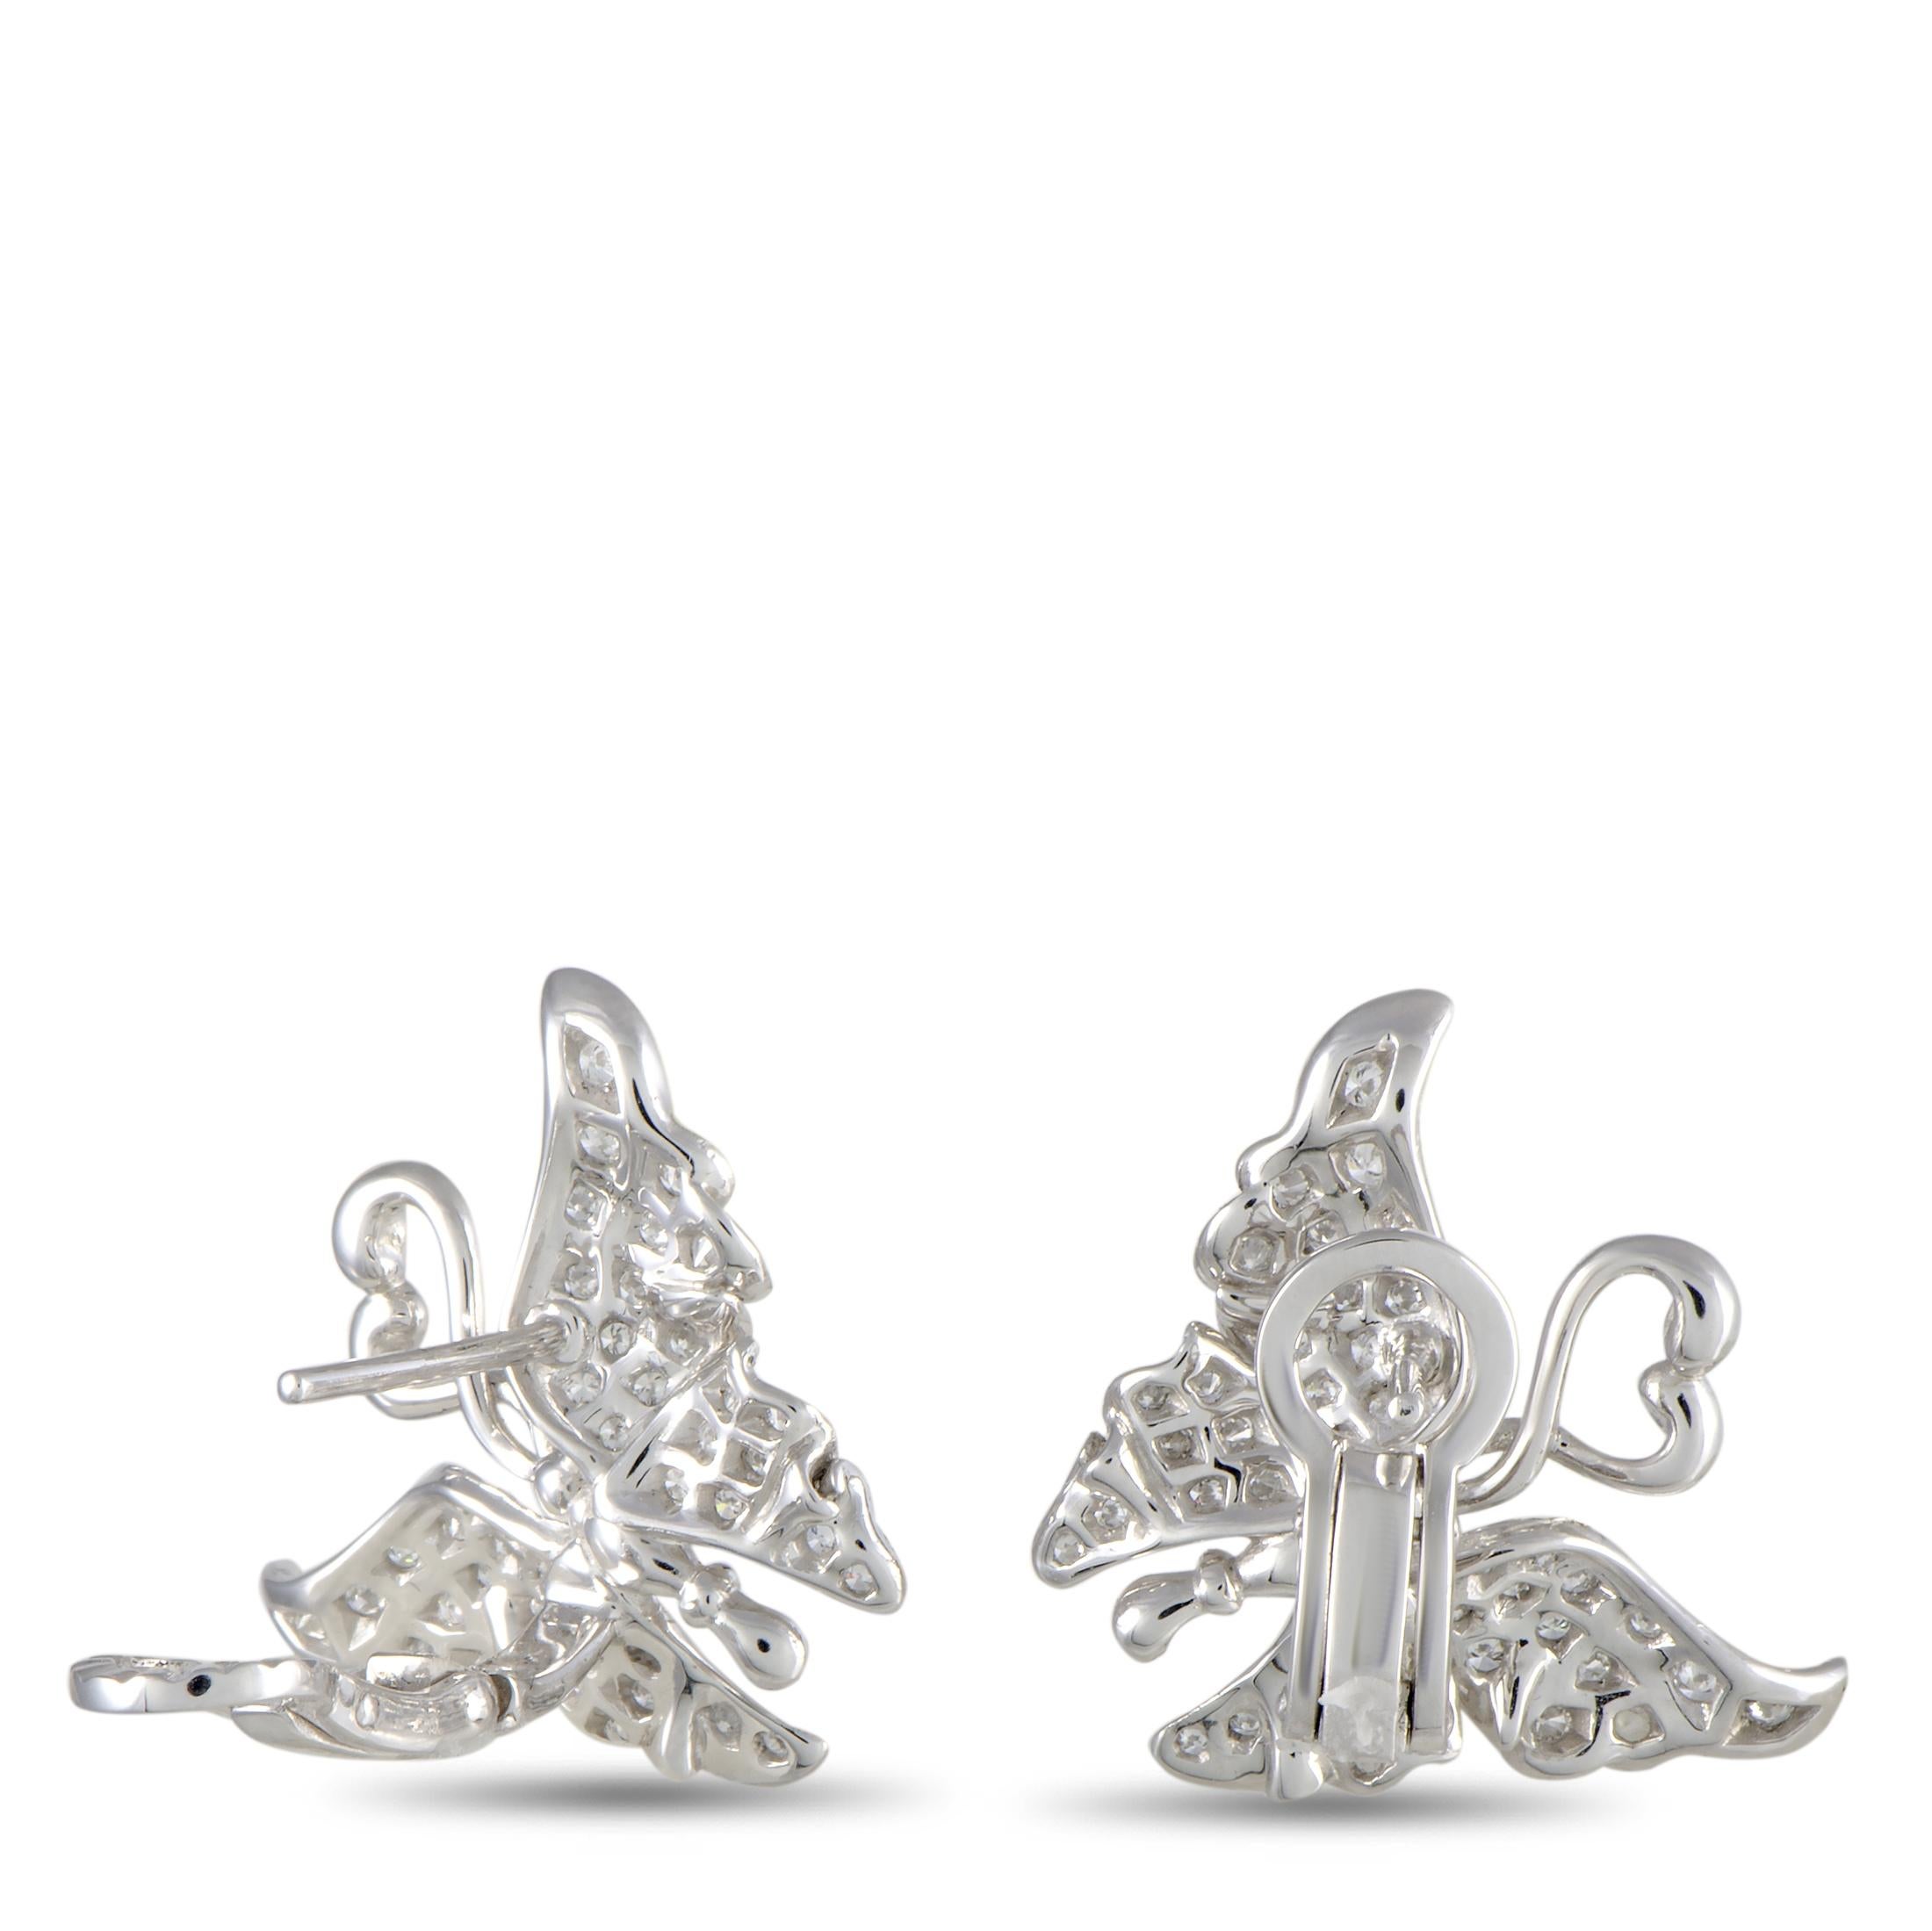 These Carrera y Carrera butterfly earrings are made out of 18K white gold and diamonds that amount to 0.70 carats. The earrings measure 1” in length and 0.50” in width and each of the two weighs 4.15 grams.
 
 The pair is offered in brand new